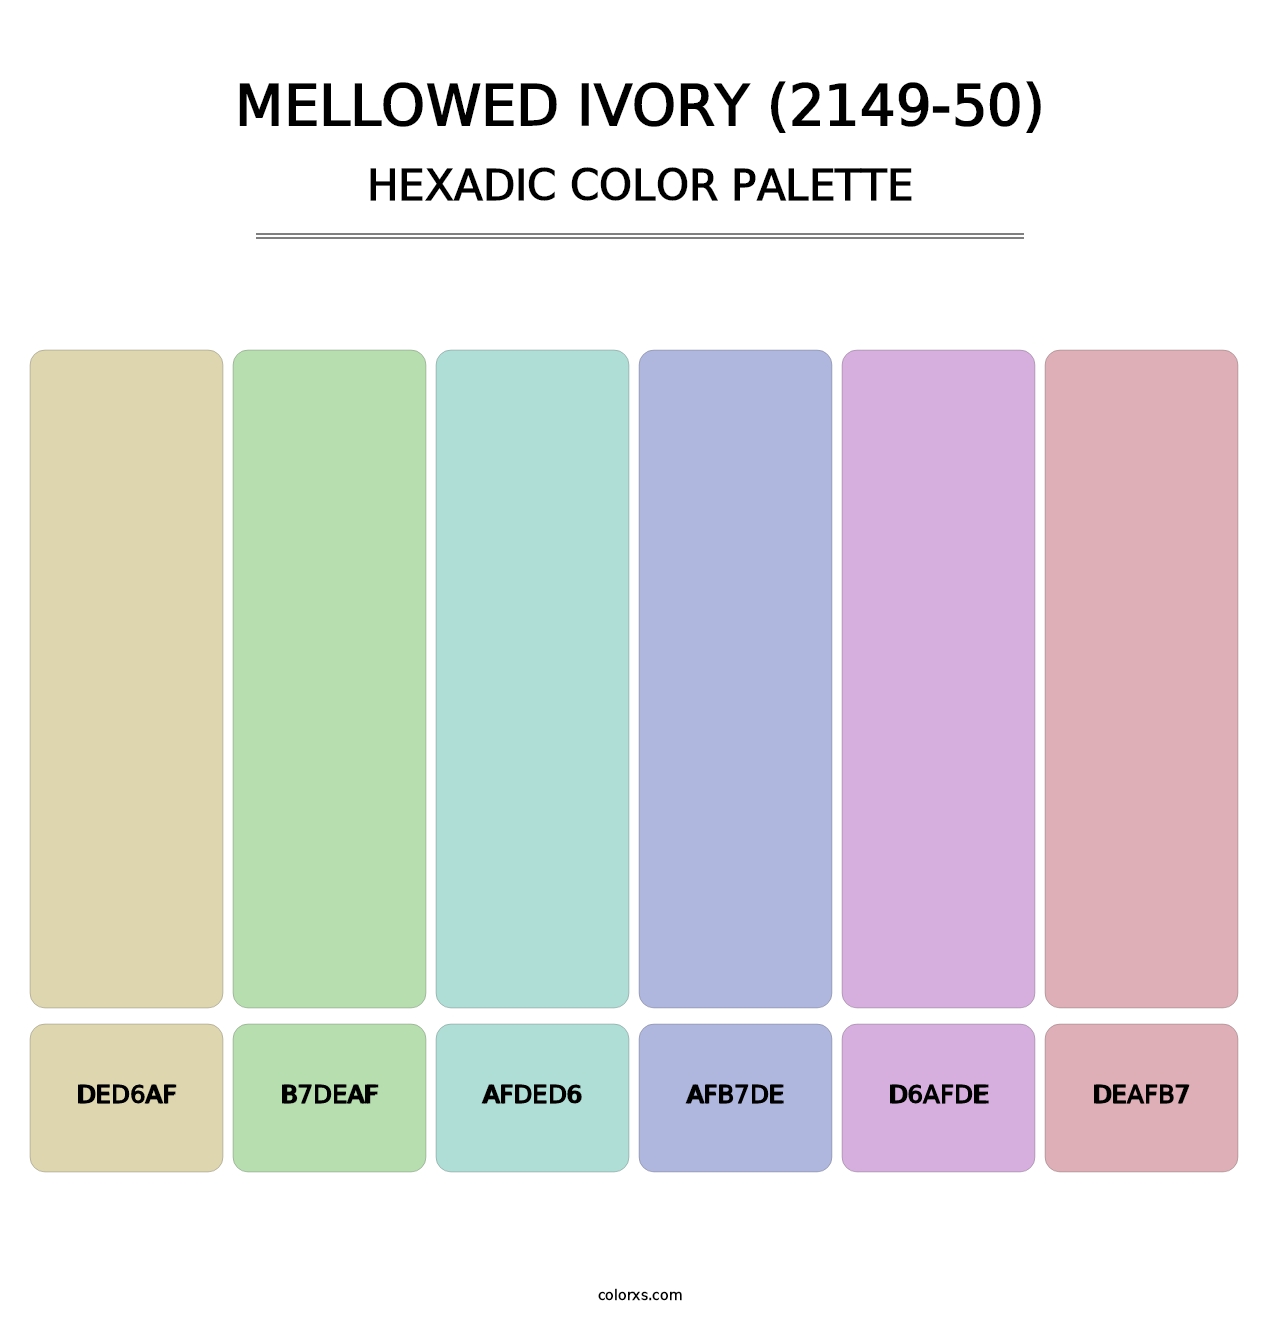 Mellowed Ivory (2149-50) - Hexadic Color Palette